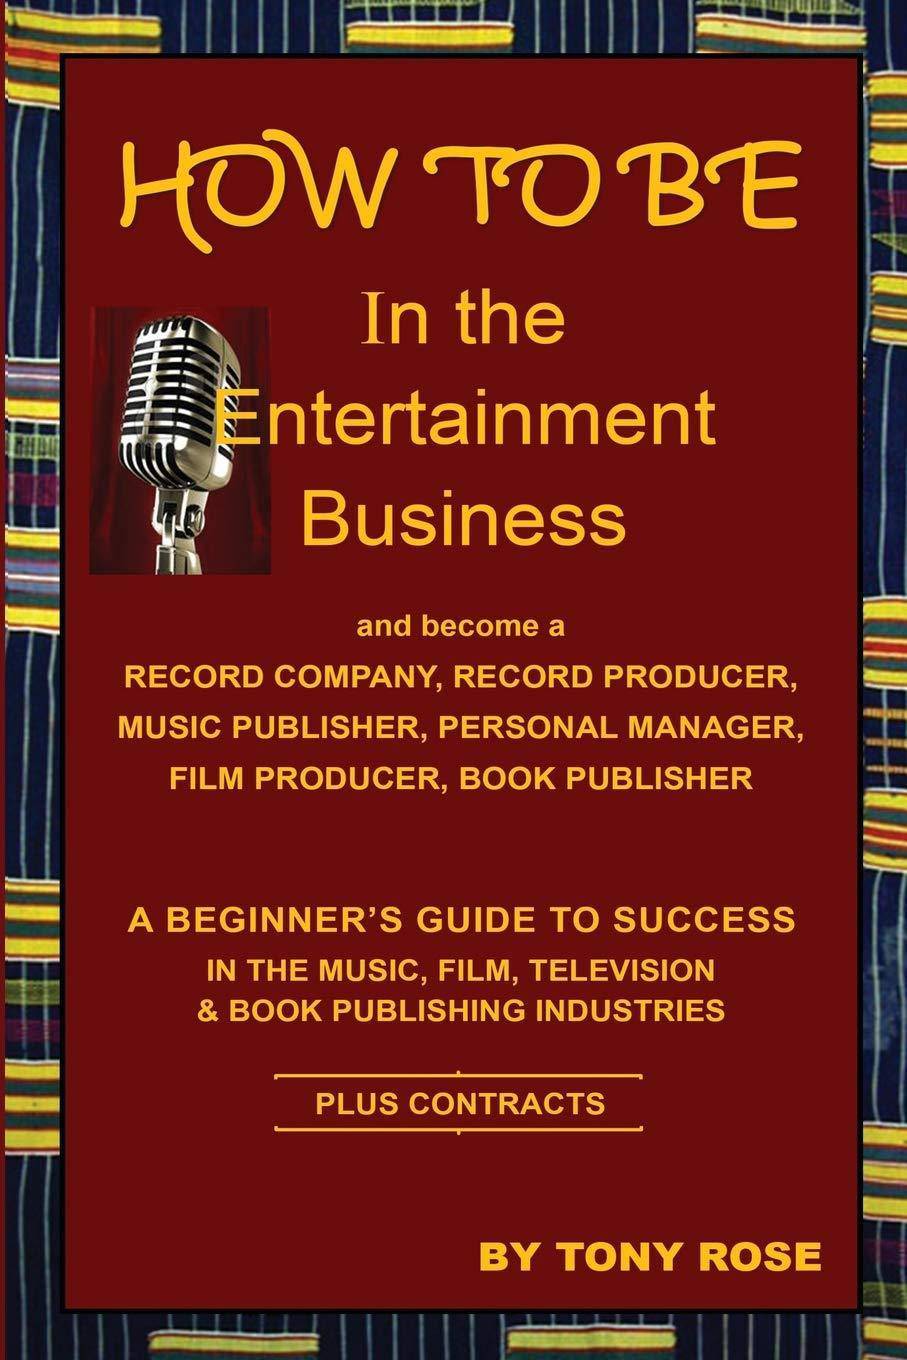 HOW TO BE In the Entertainment Business - SureShot Books Publishing LLC